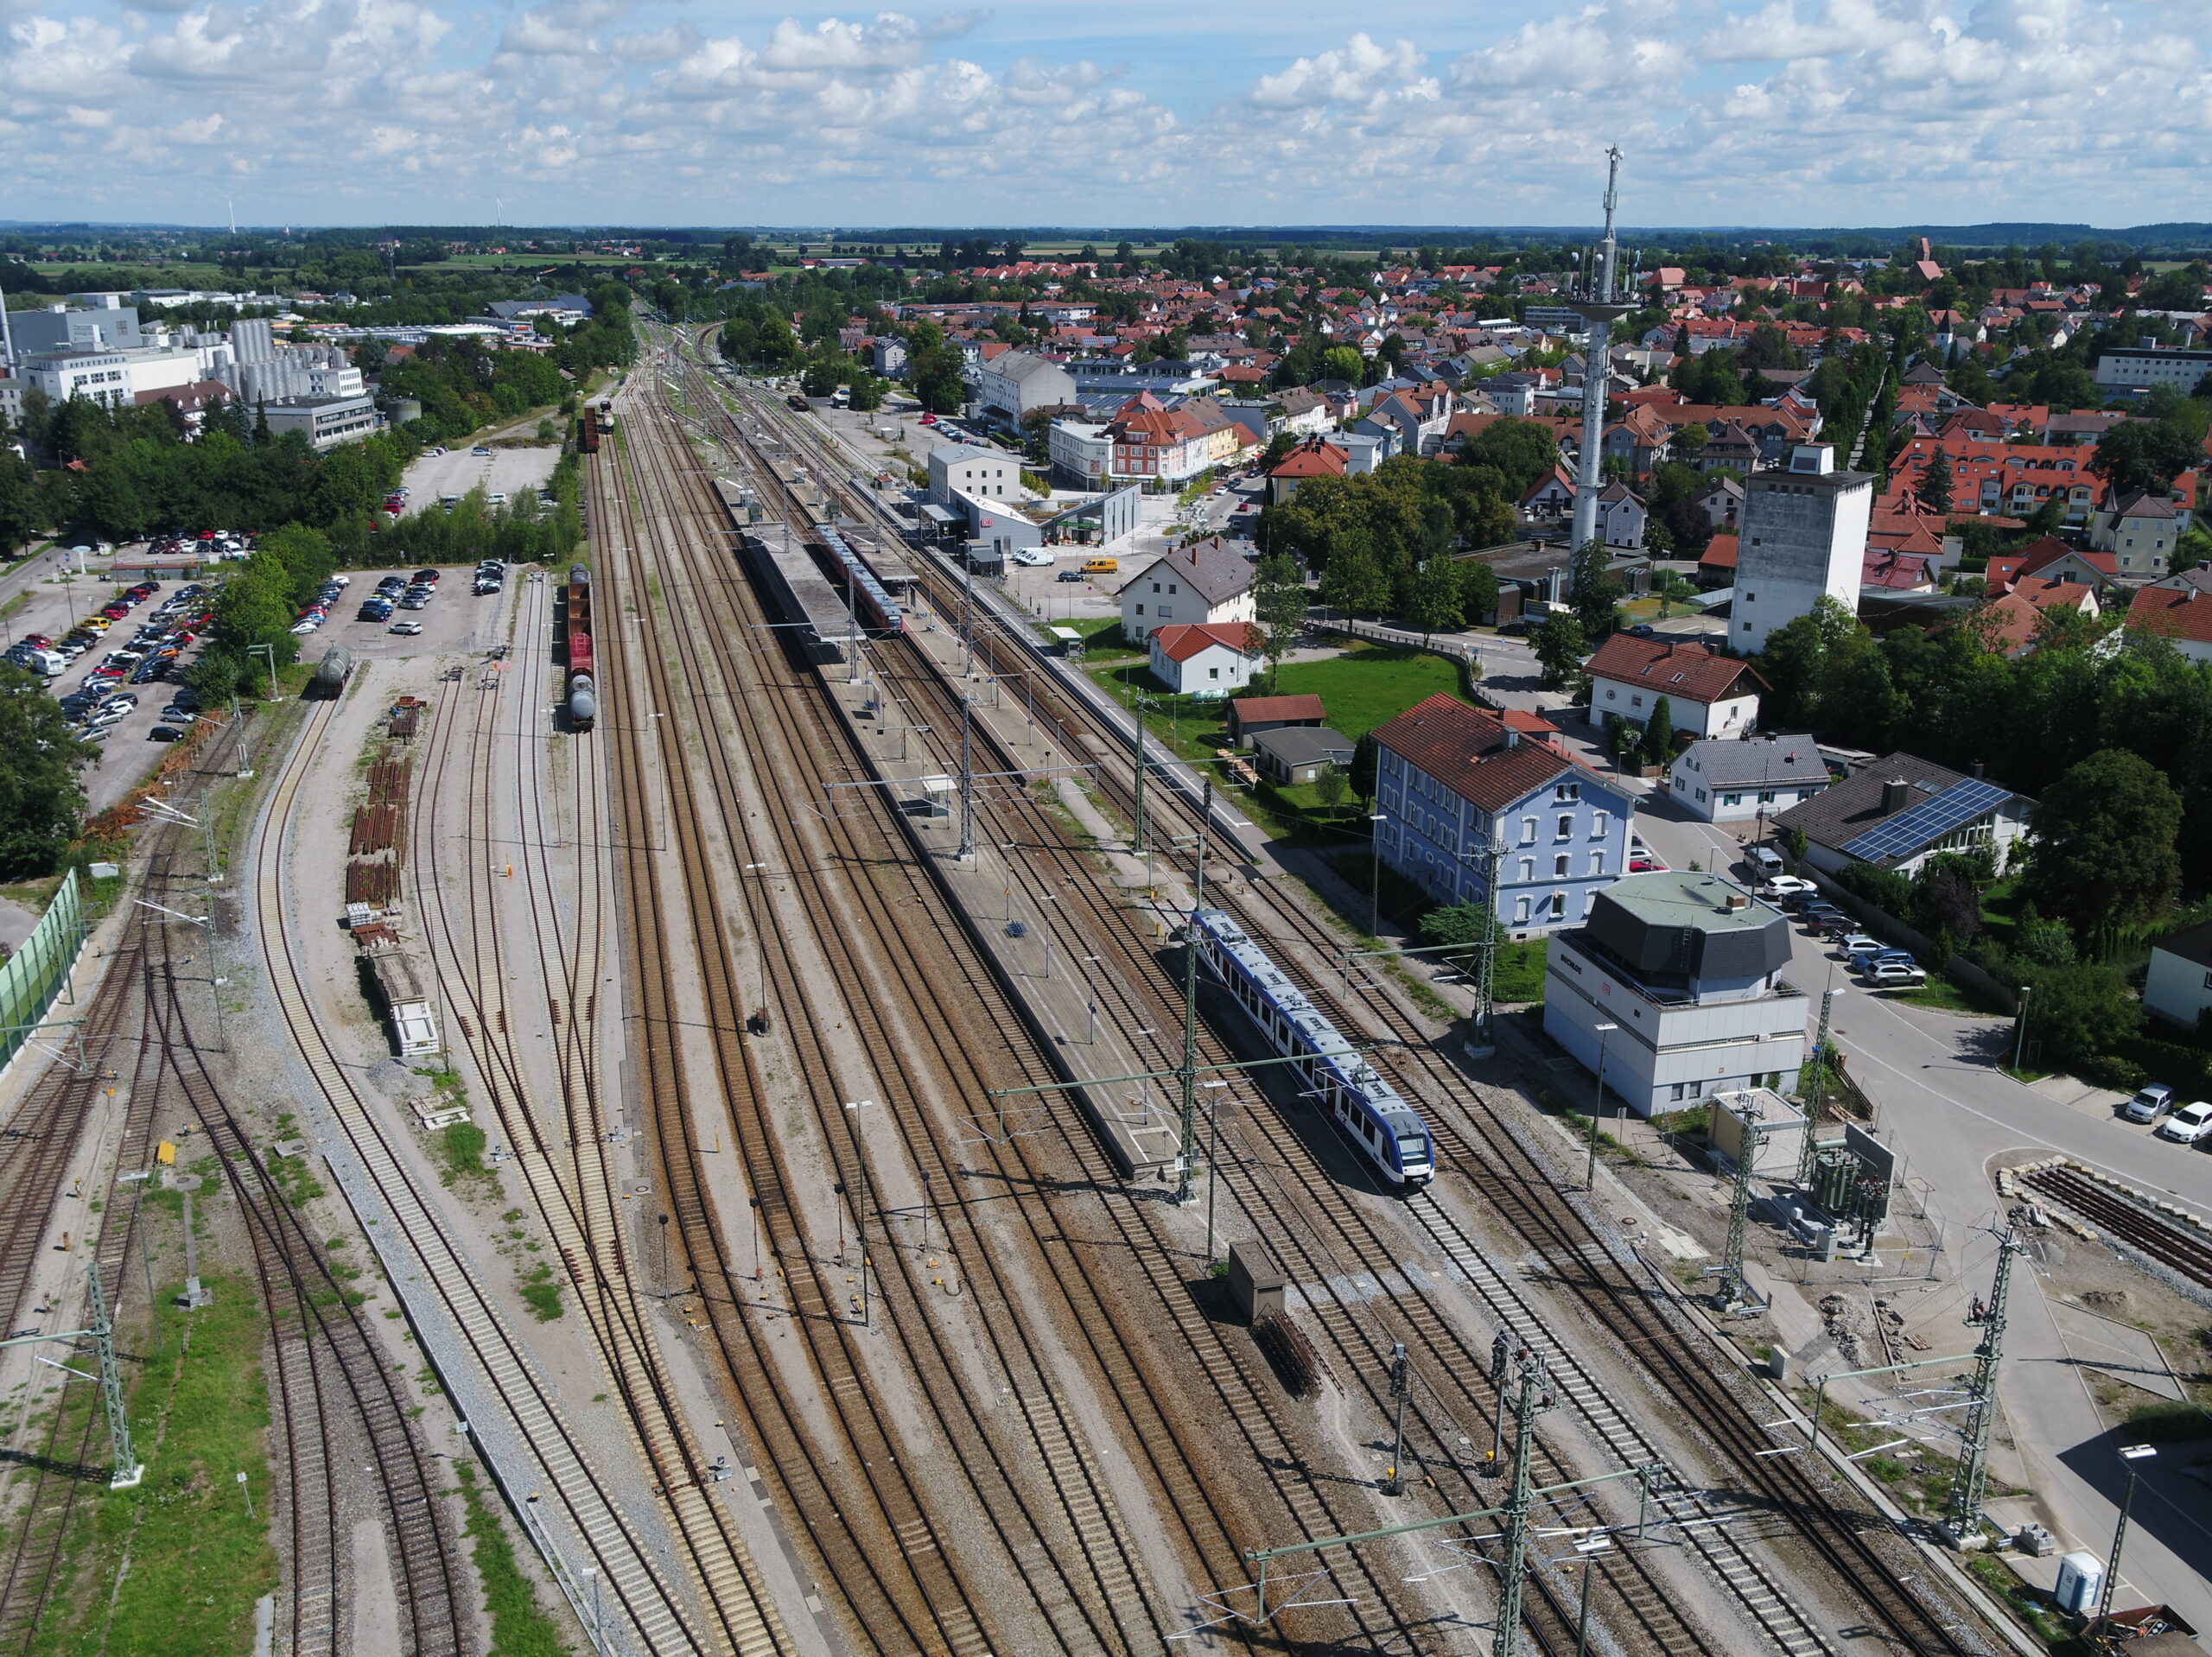 Rail Electrification - line upgrade 48 multicopter image 1 - central station Buchloe, Germany from above